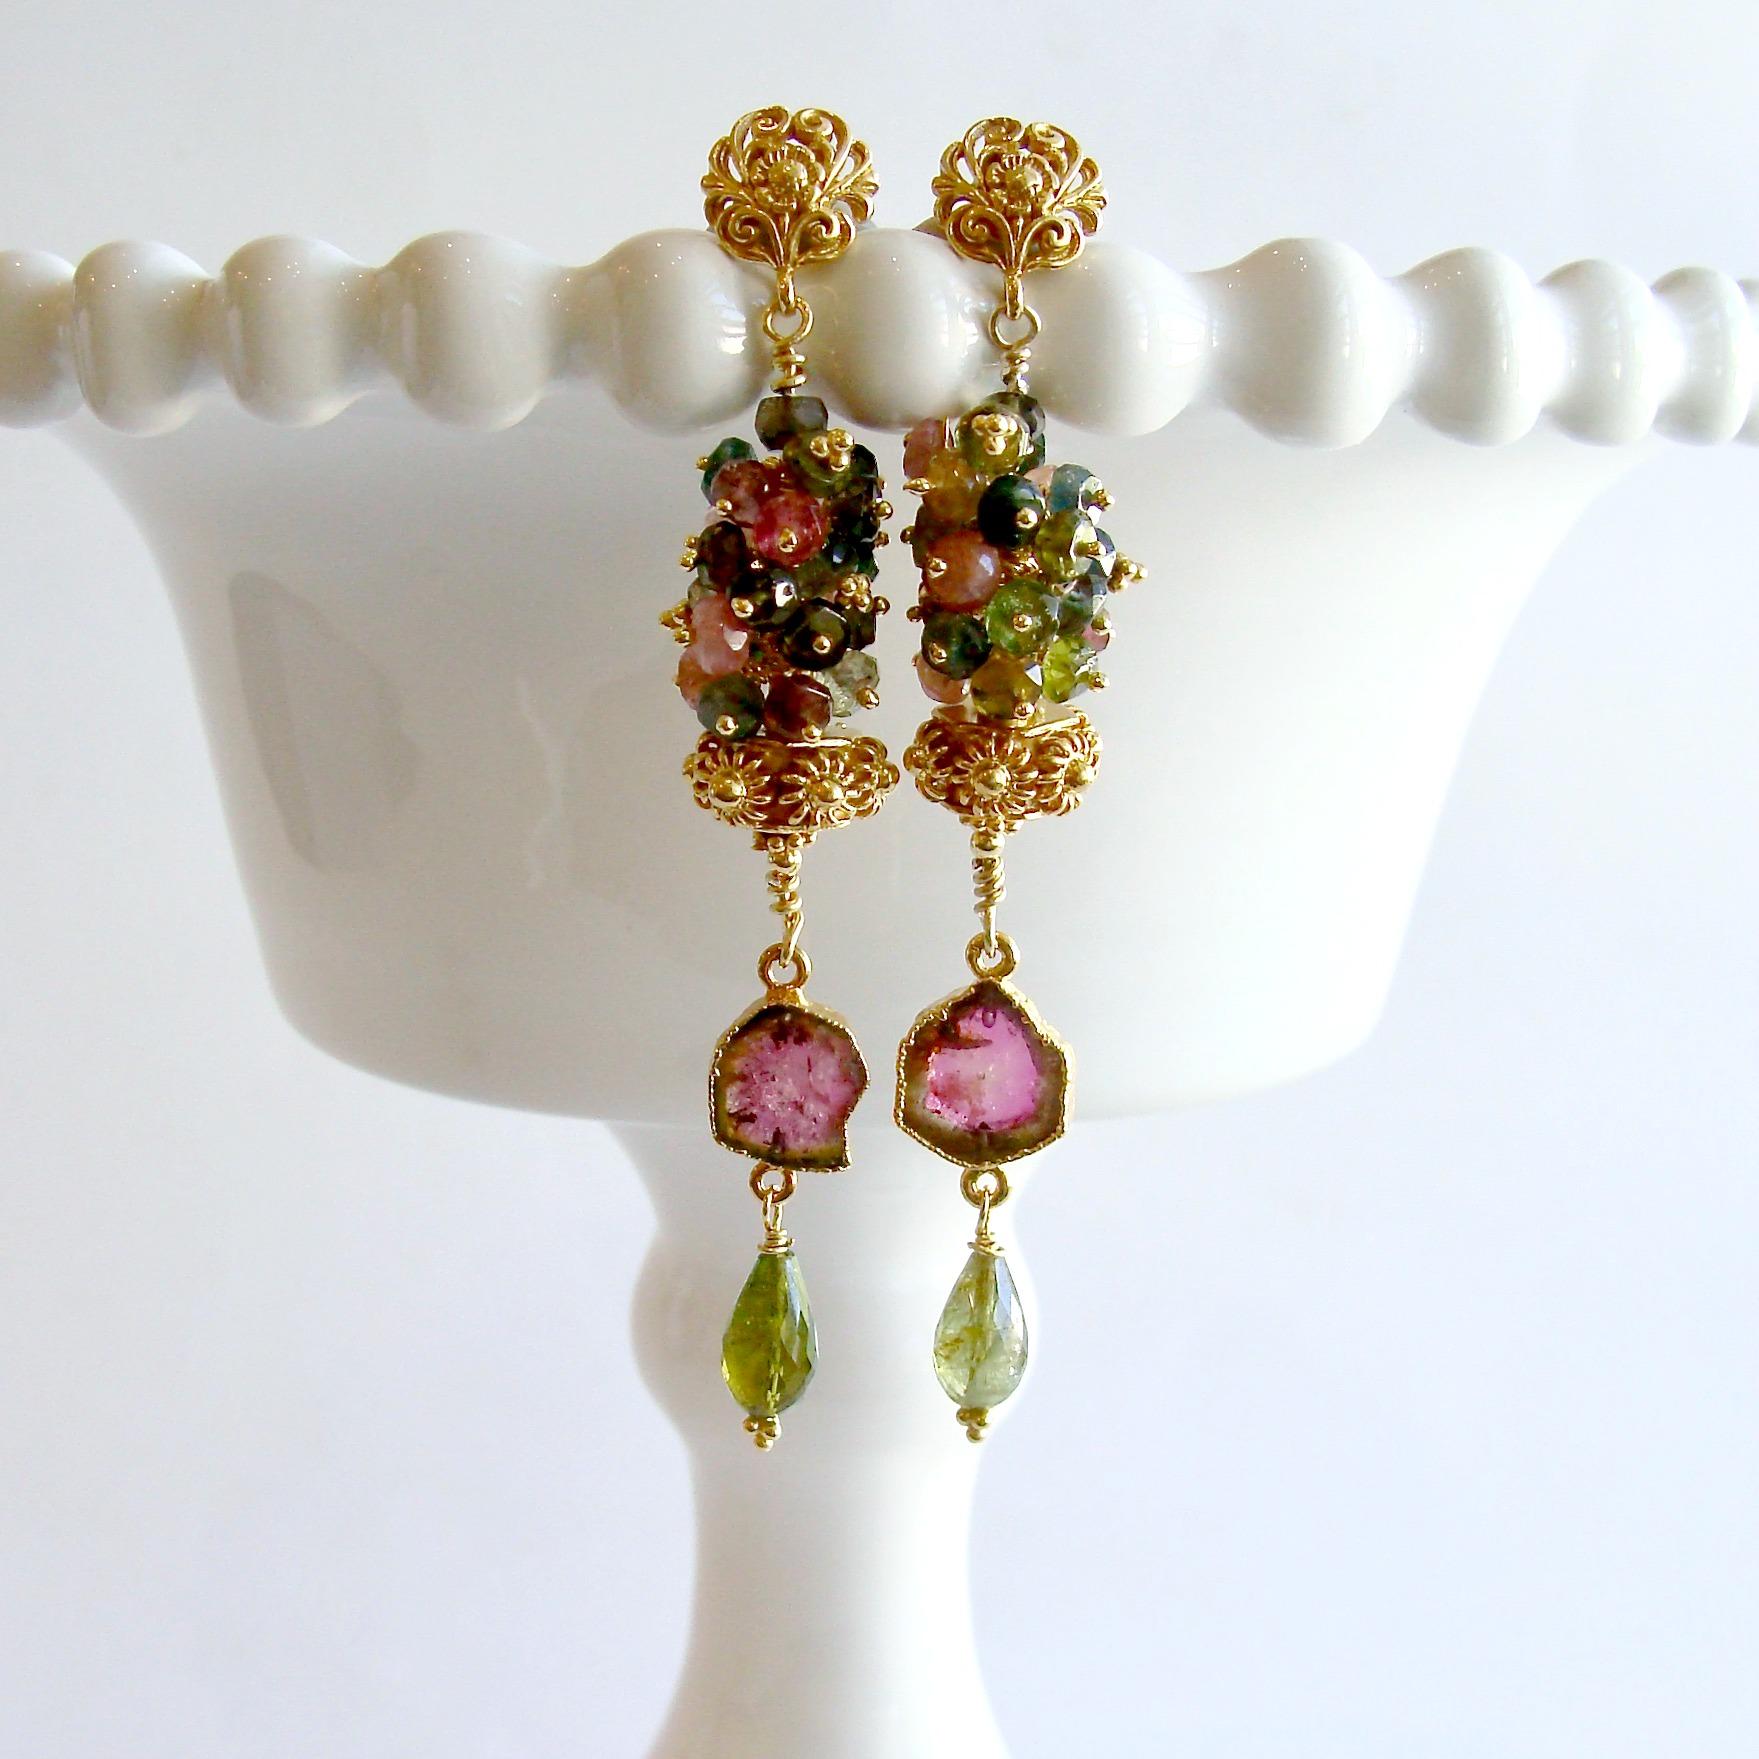 A generous cluster of multi-colored tourmaline rondelles crowns a hexagonal gold vermeil cannetille bead, while coveted watermelon tourmaline slices  and green tourmaline teardrops dangle sweetly below.  The design is suspended from gorgeous gold